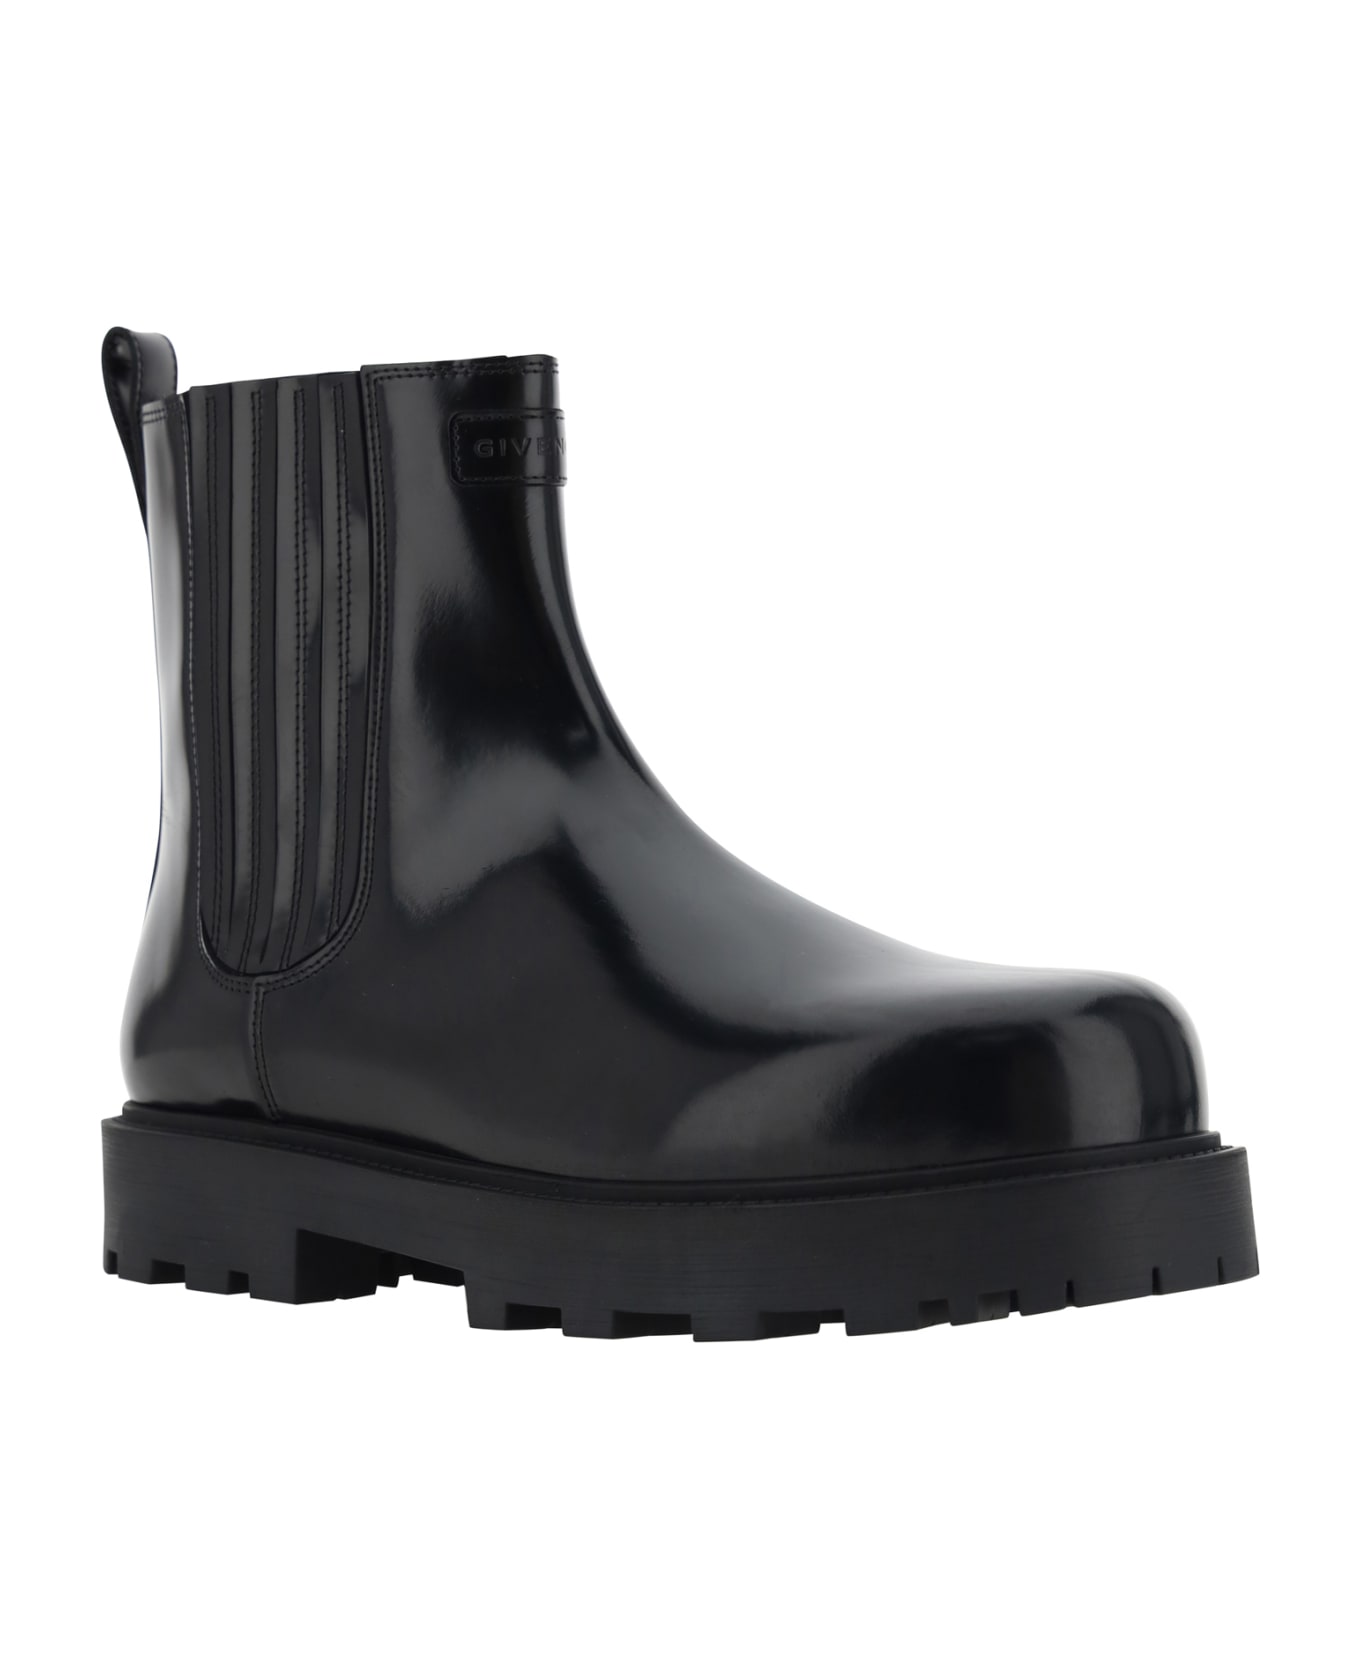 Givenchy Brushed Leather Chelsea Boots - Black ブーツ